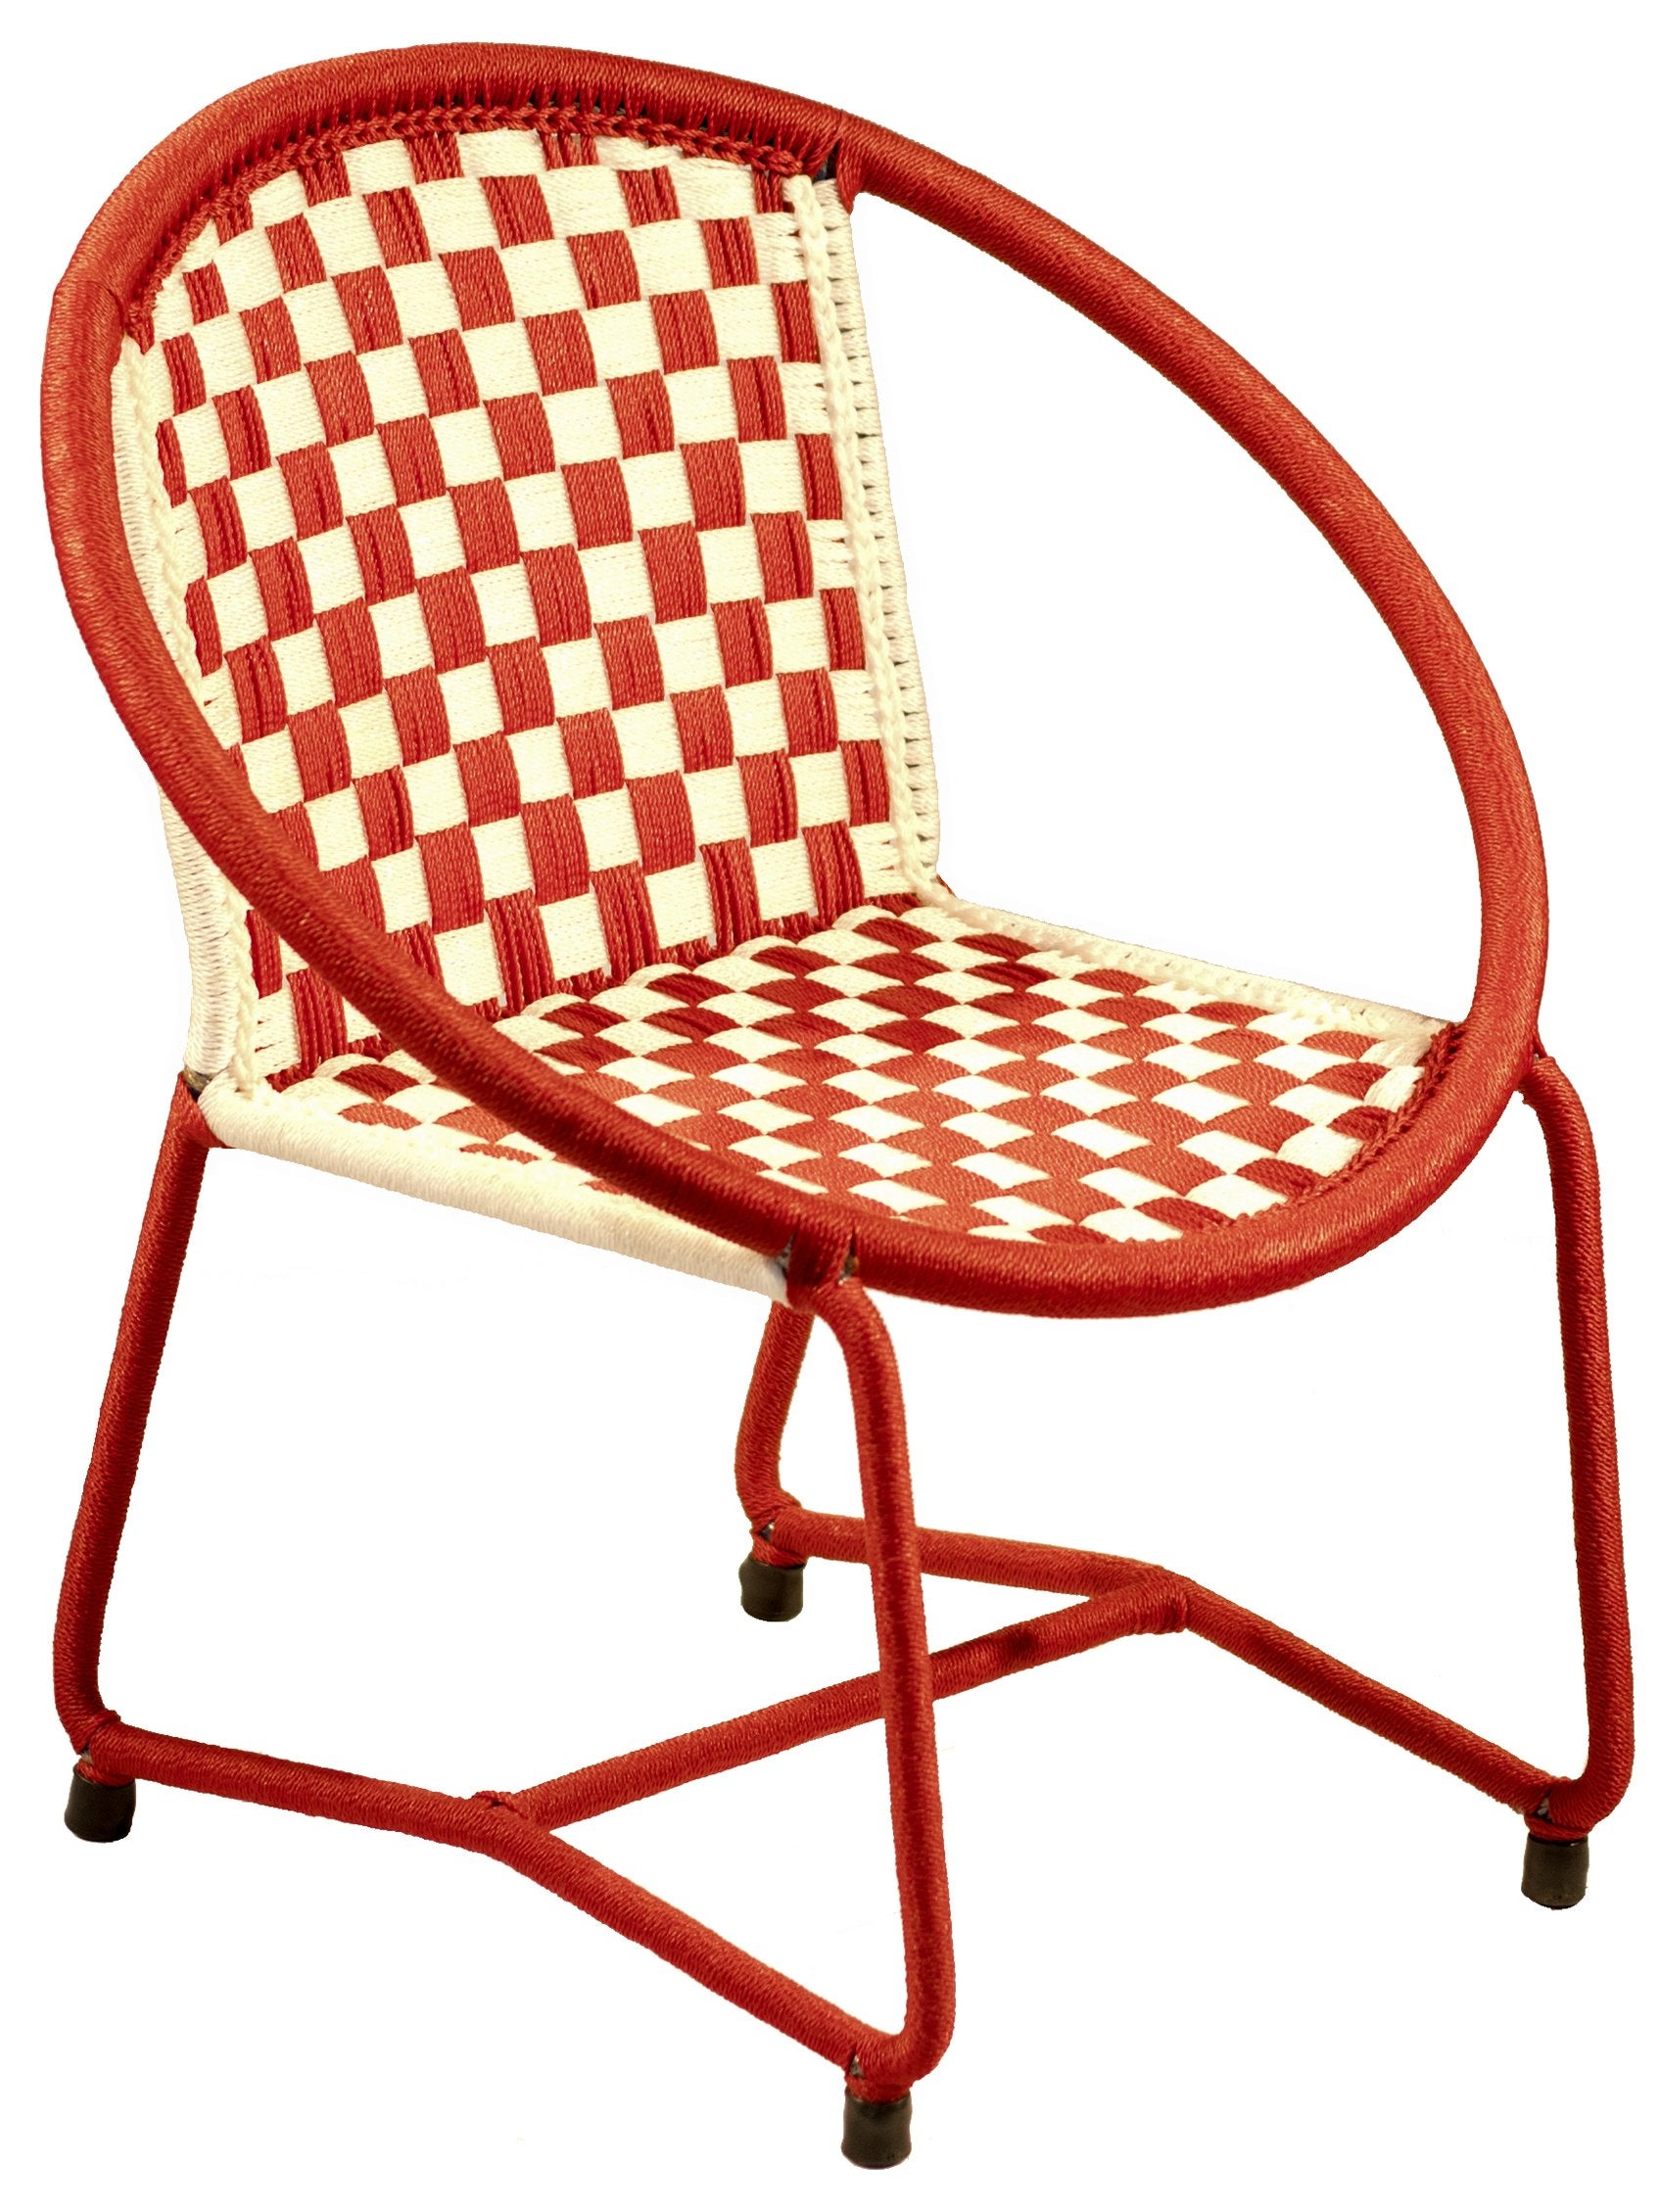 This Might Be the New Rattan Chair